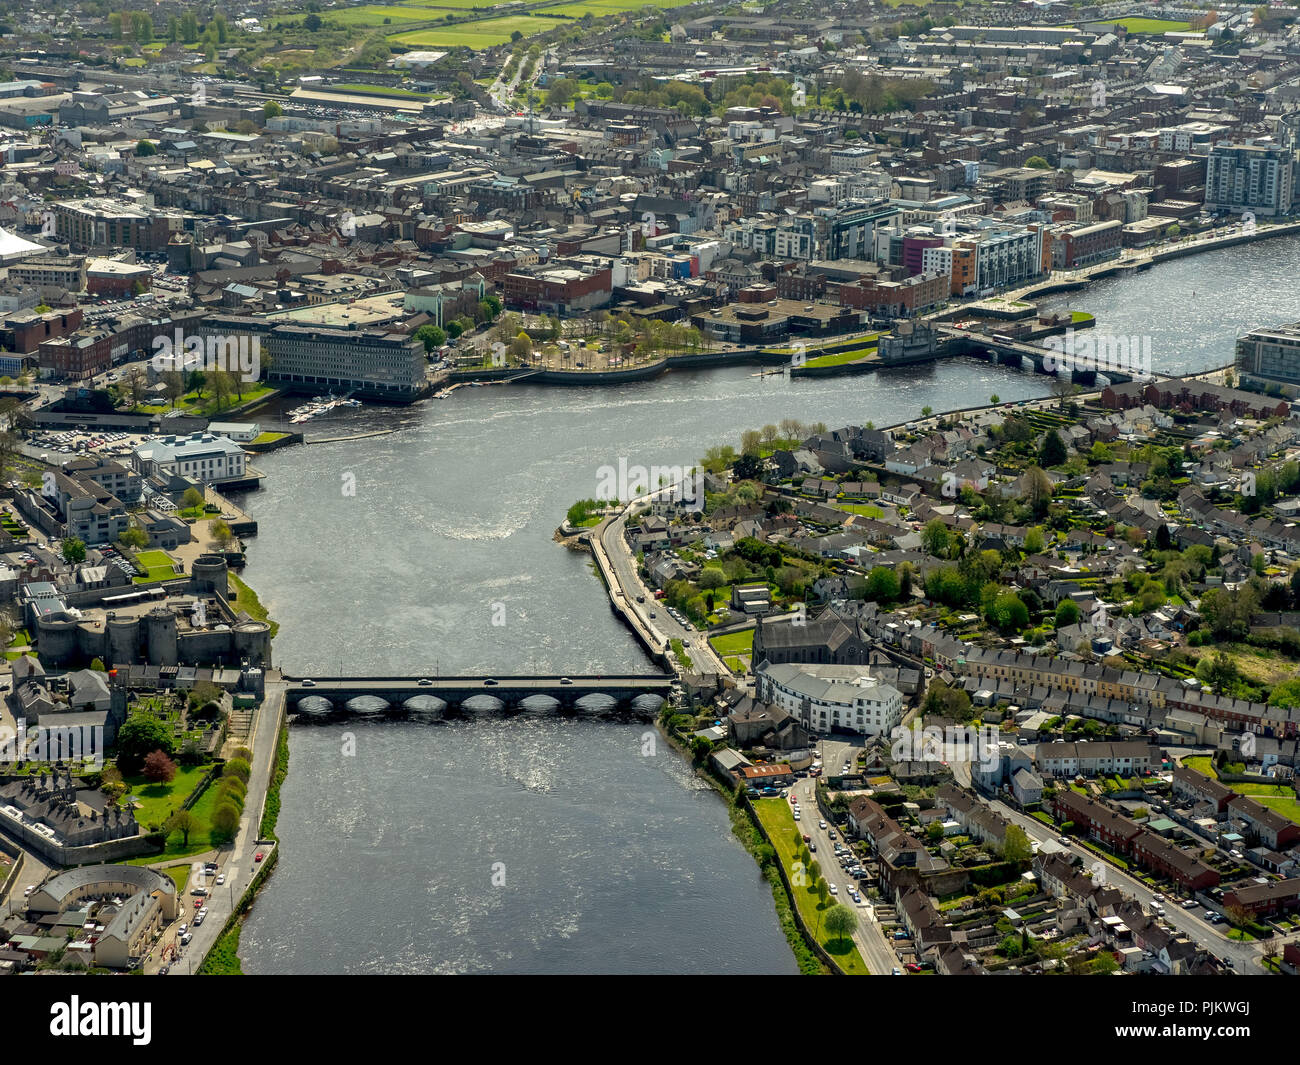 Shannon River flowing through Limerick, Limerick, County Clare, Limerick, Ireland, Europe Stock Photo